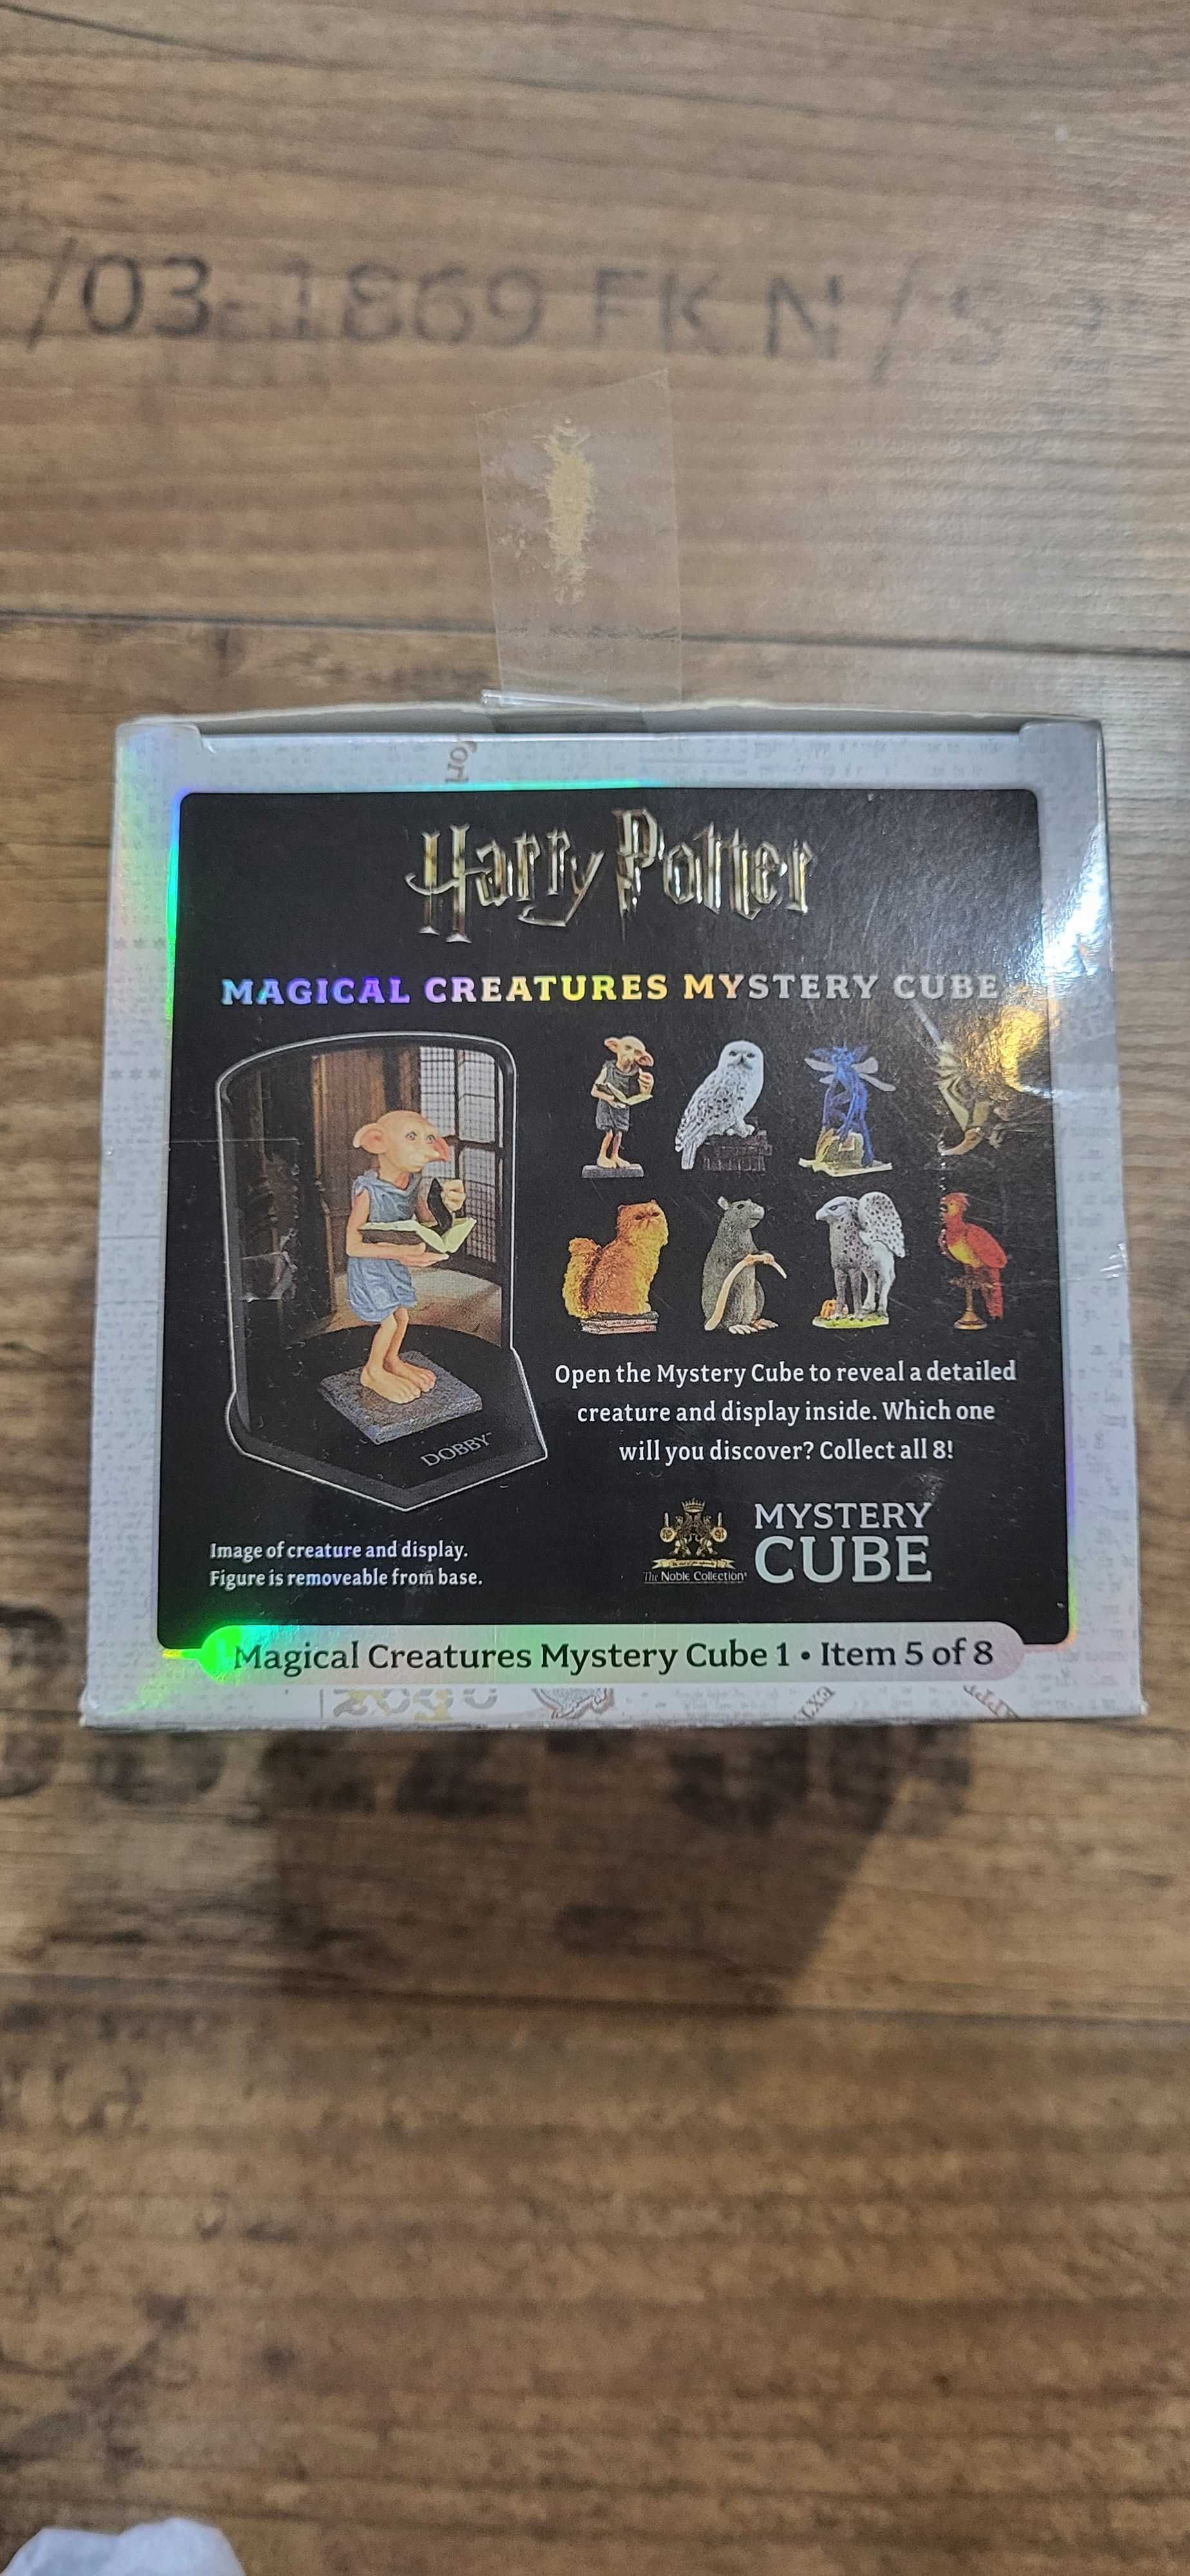 Harry Potter Mistery cube premium creature and display